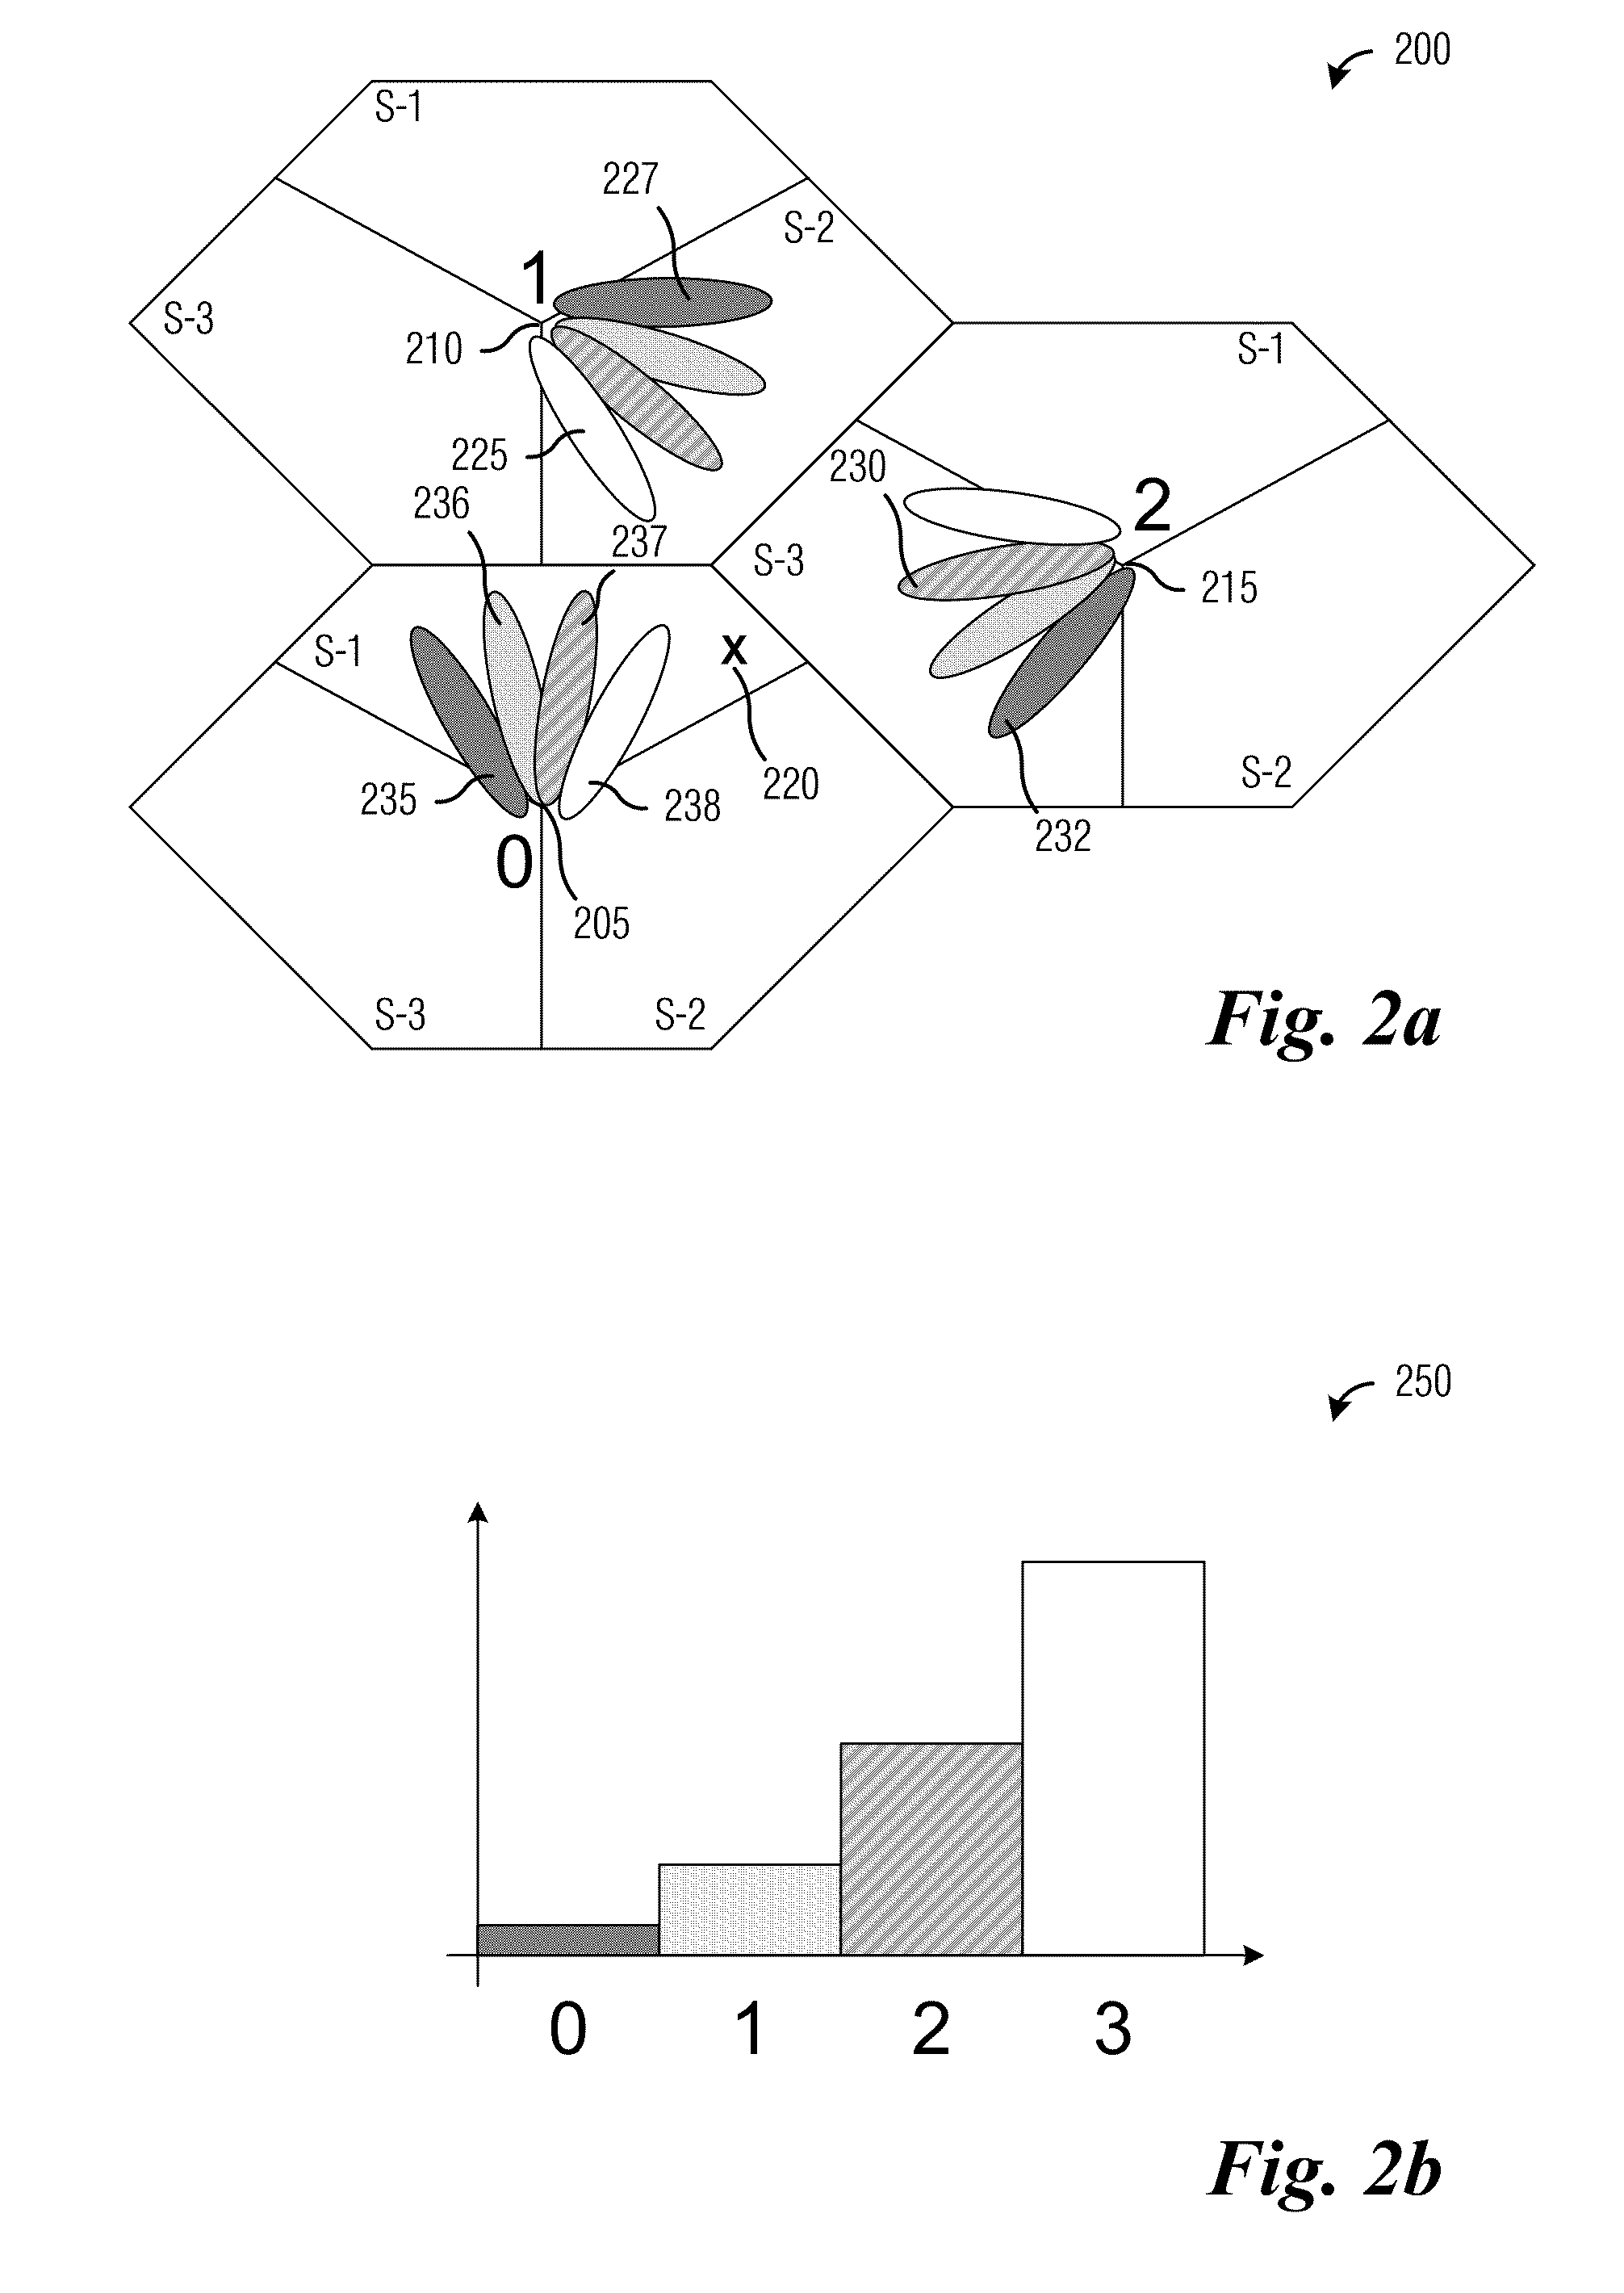 System and Method for Enabling Coordinated Beam Switching and Scheduling